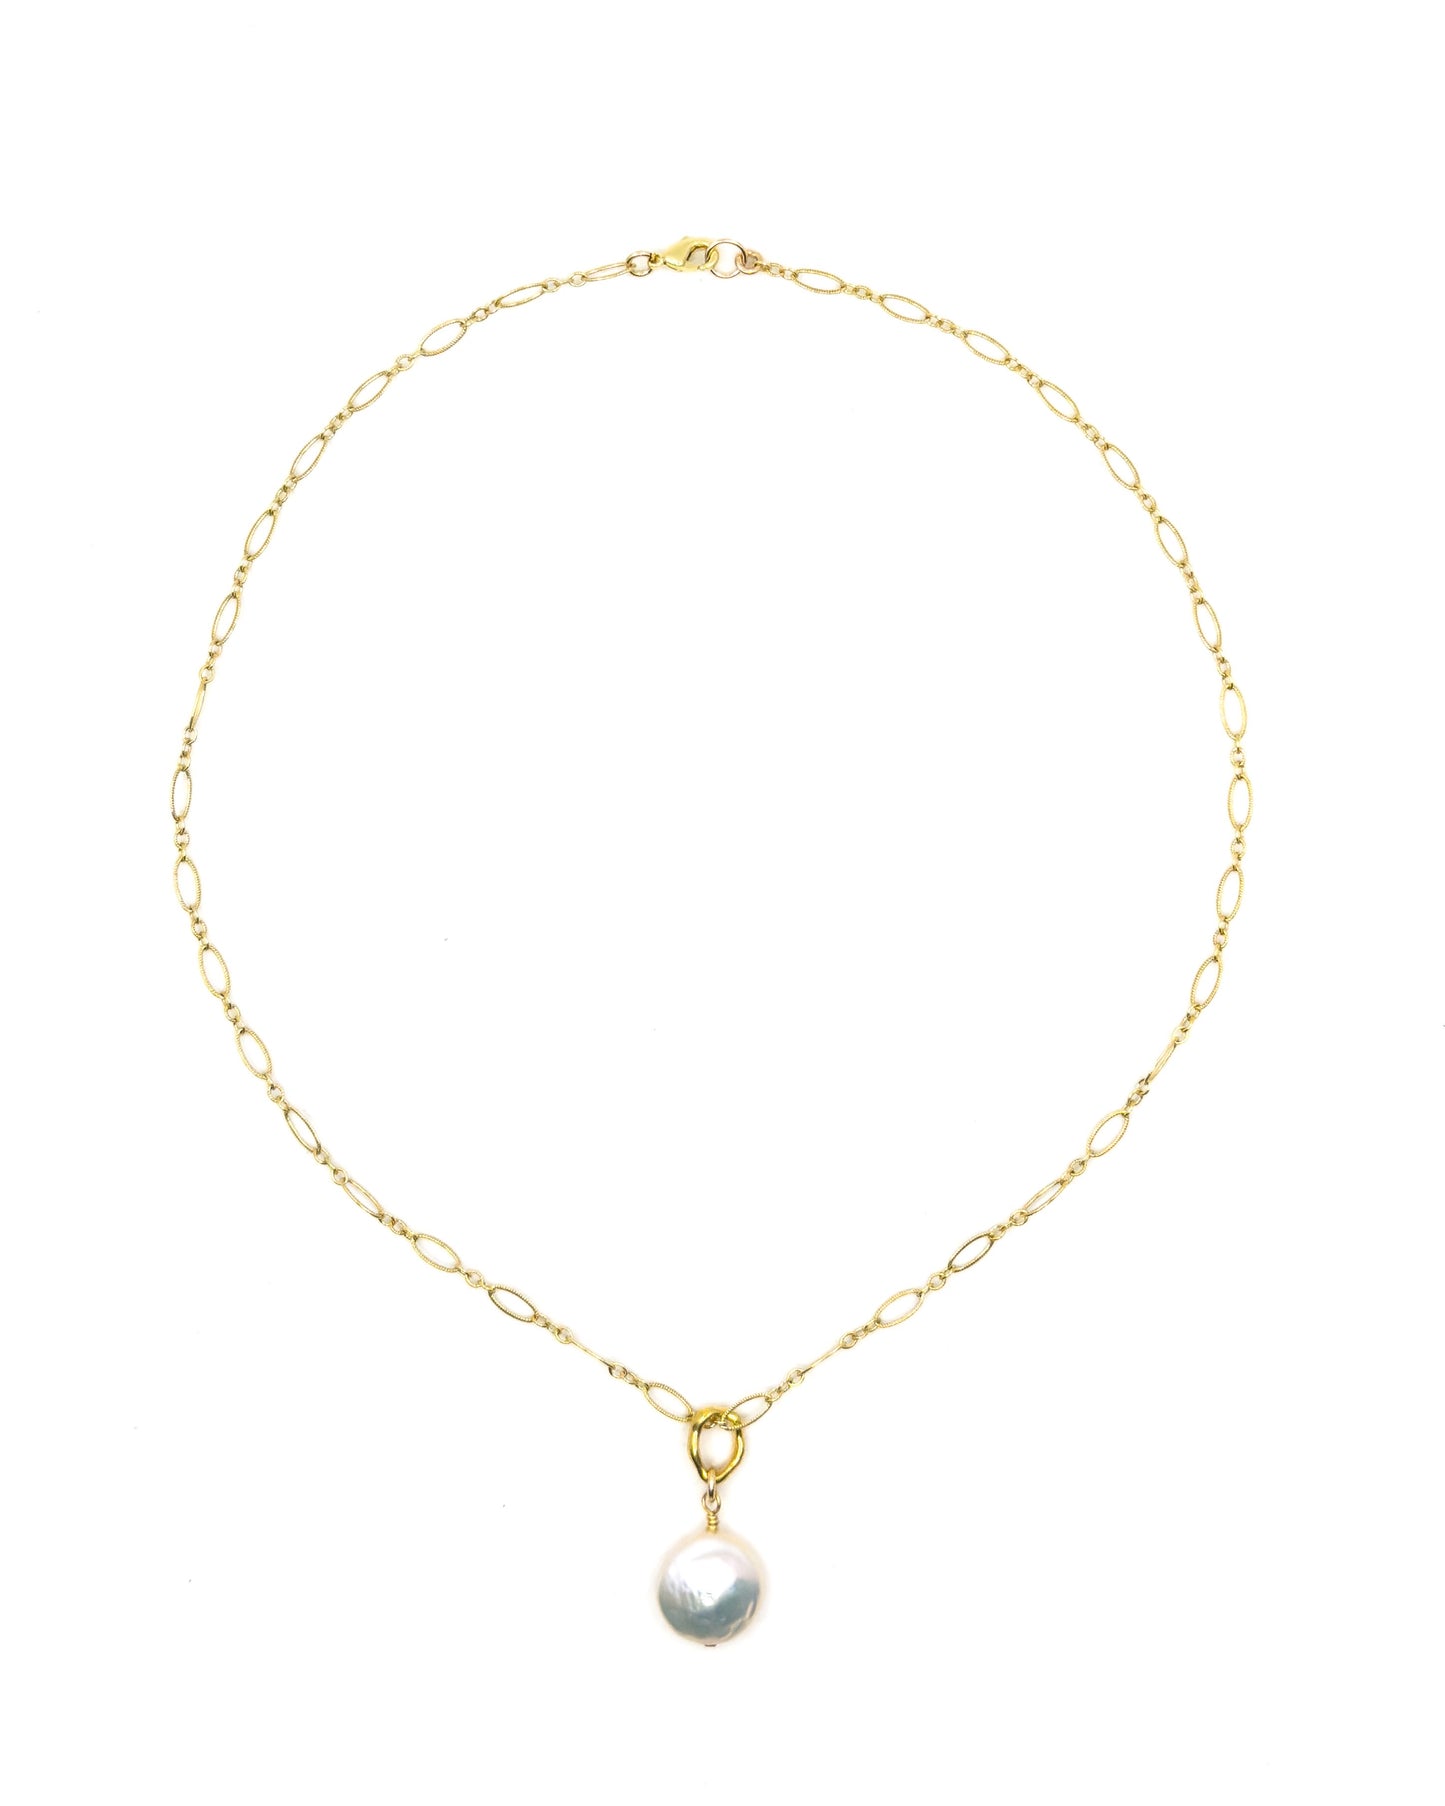 Detailed Gold-filled Chain With Single Coin Pearl Charm